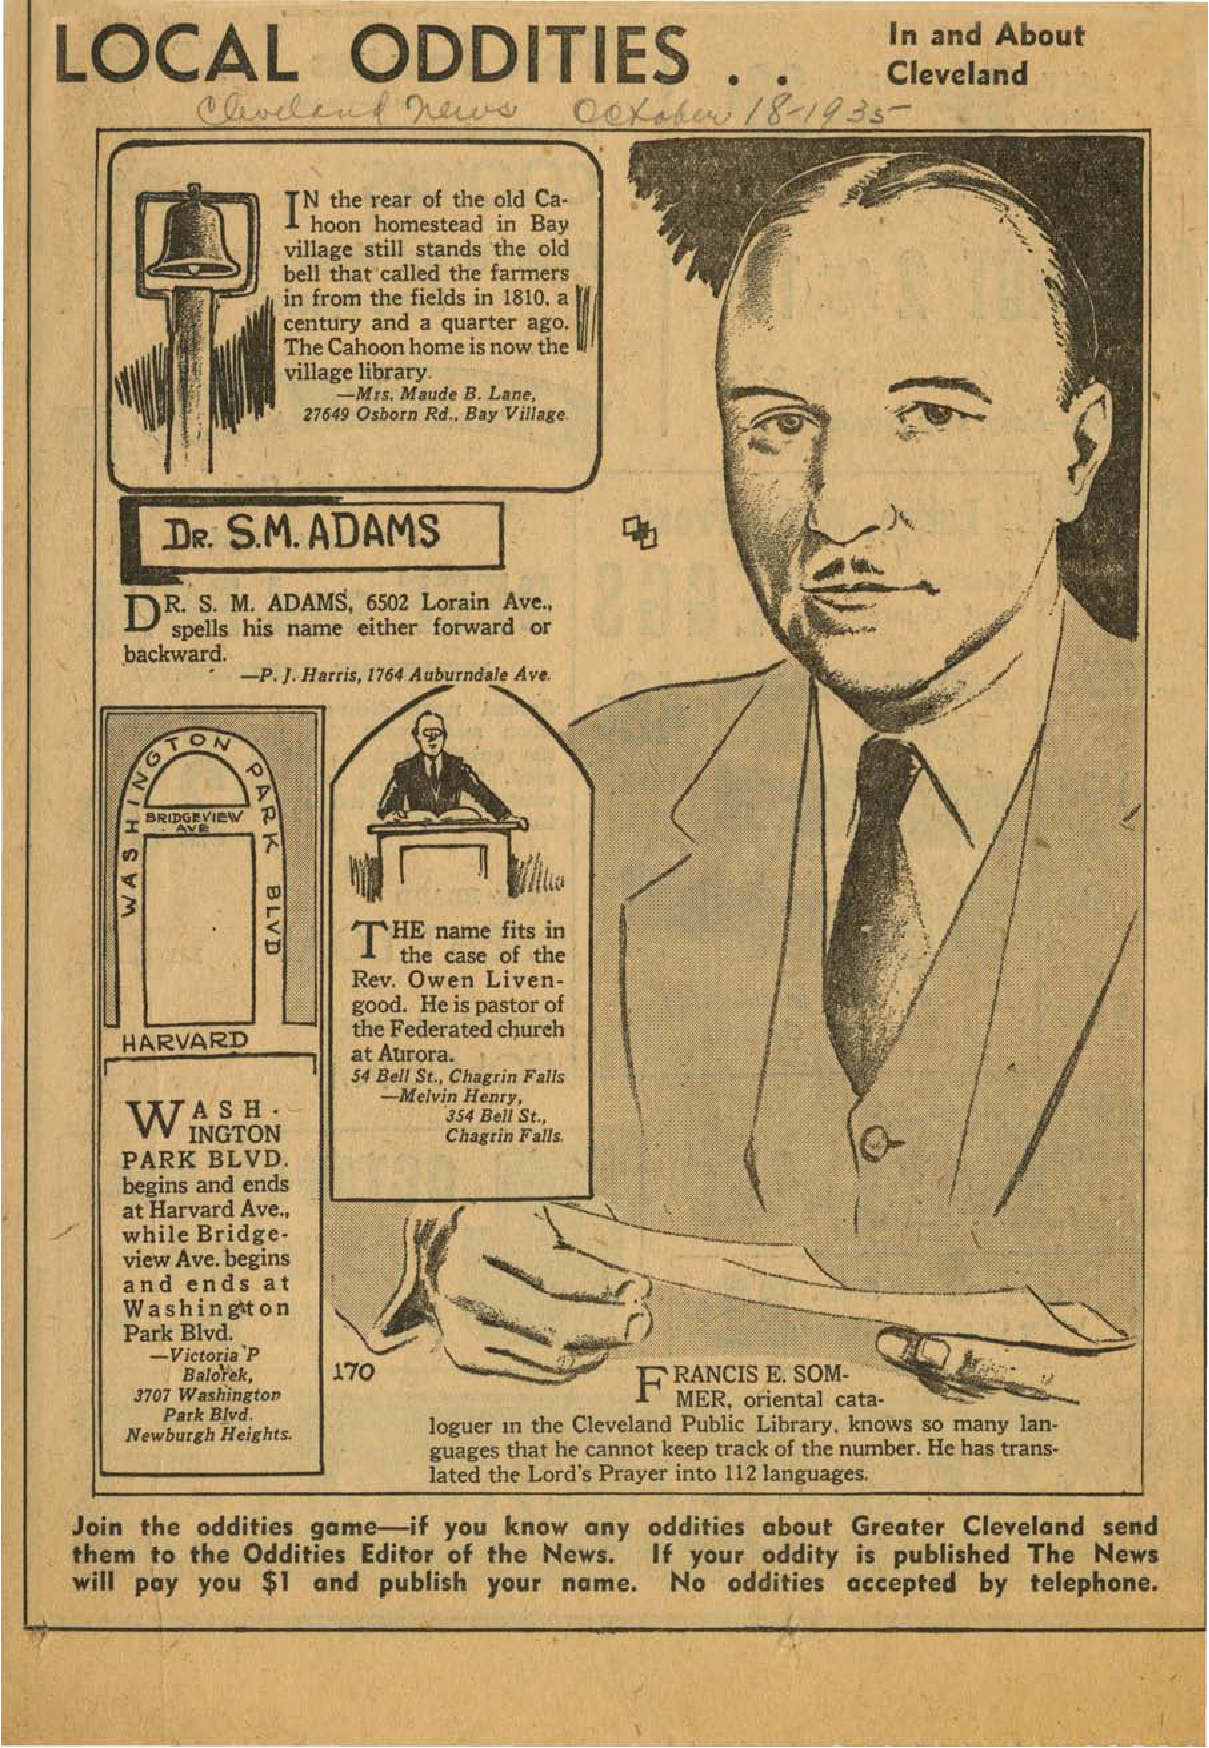 Local Oddities newspaper illustration of Frances E. Sommer, Special cataloger of languages in the John G. White Division of the Cleveland Public Library, and article about his work